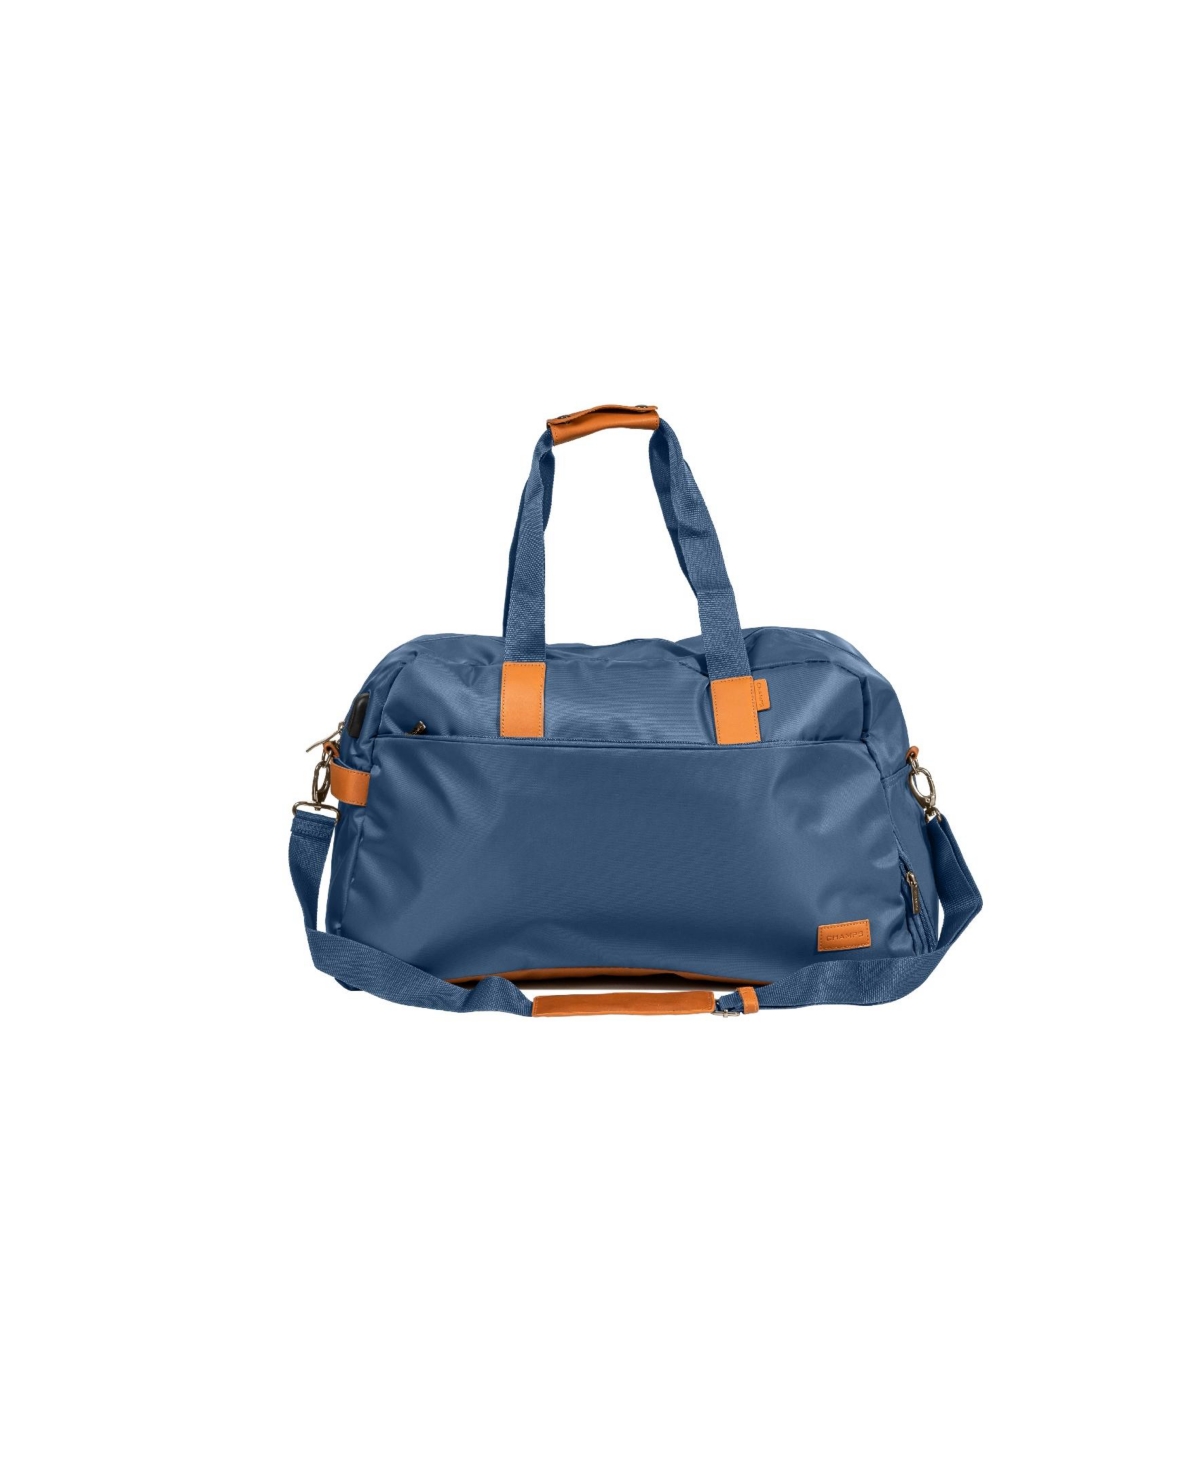 Shop Champs The Weekender Duffle Bag In Navy